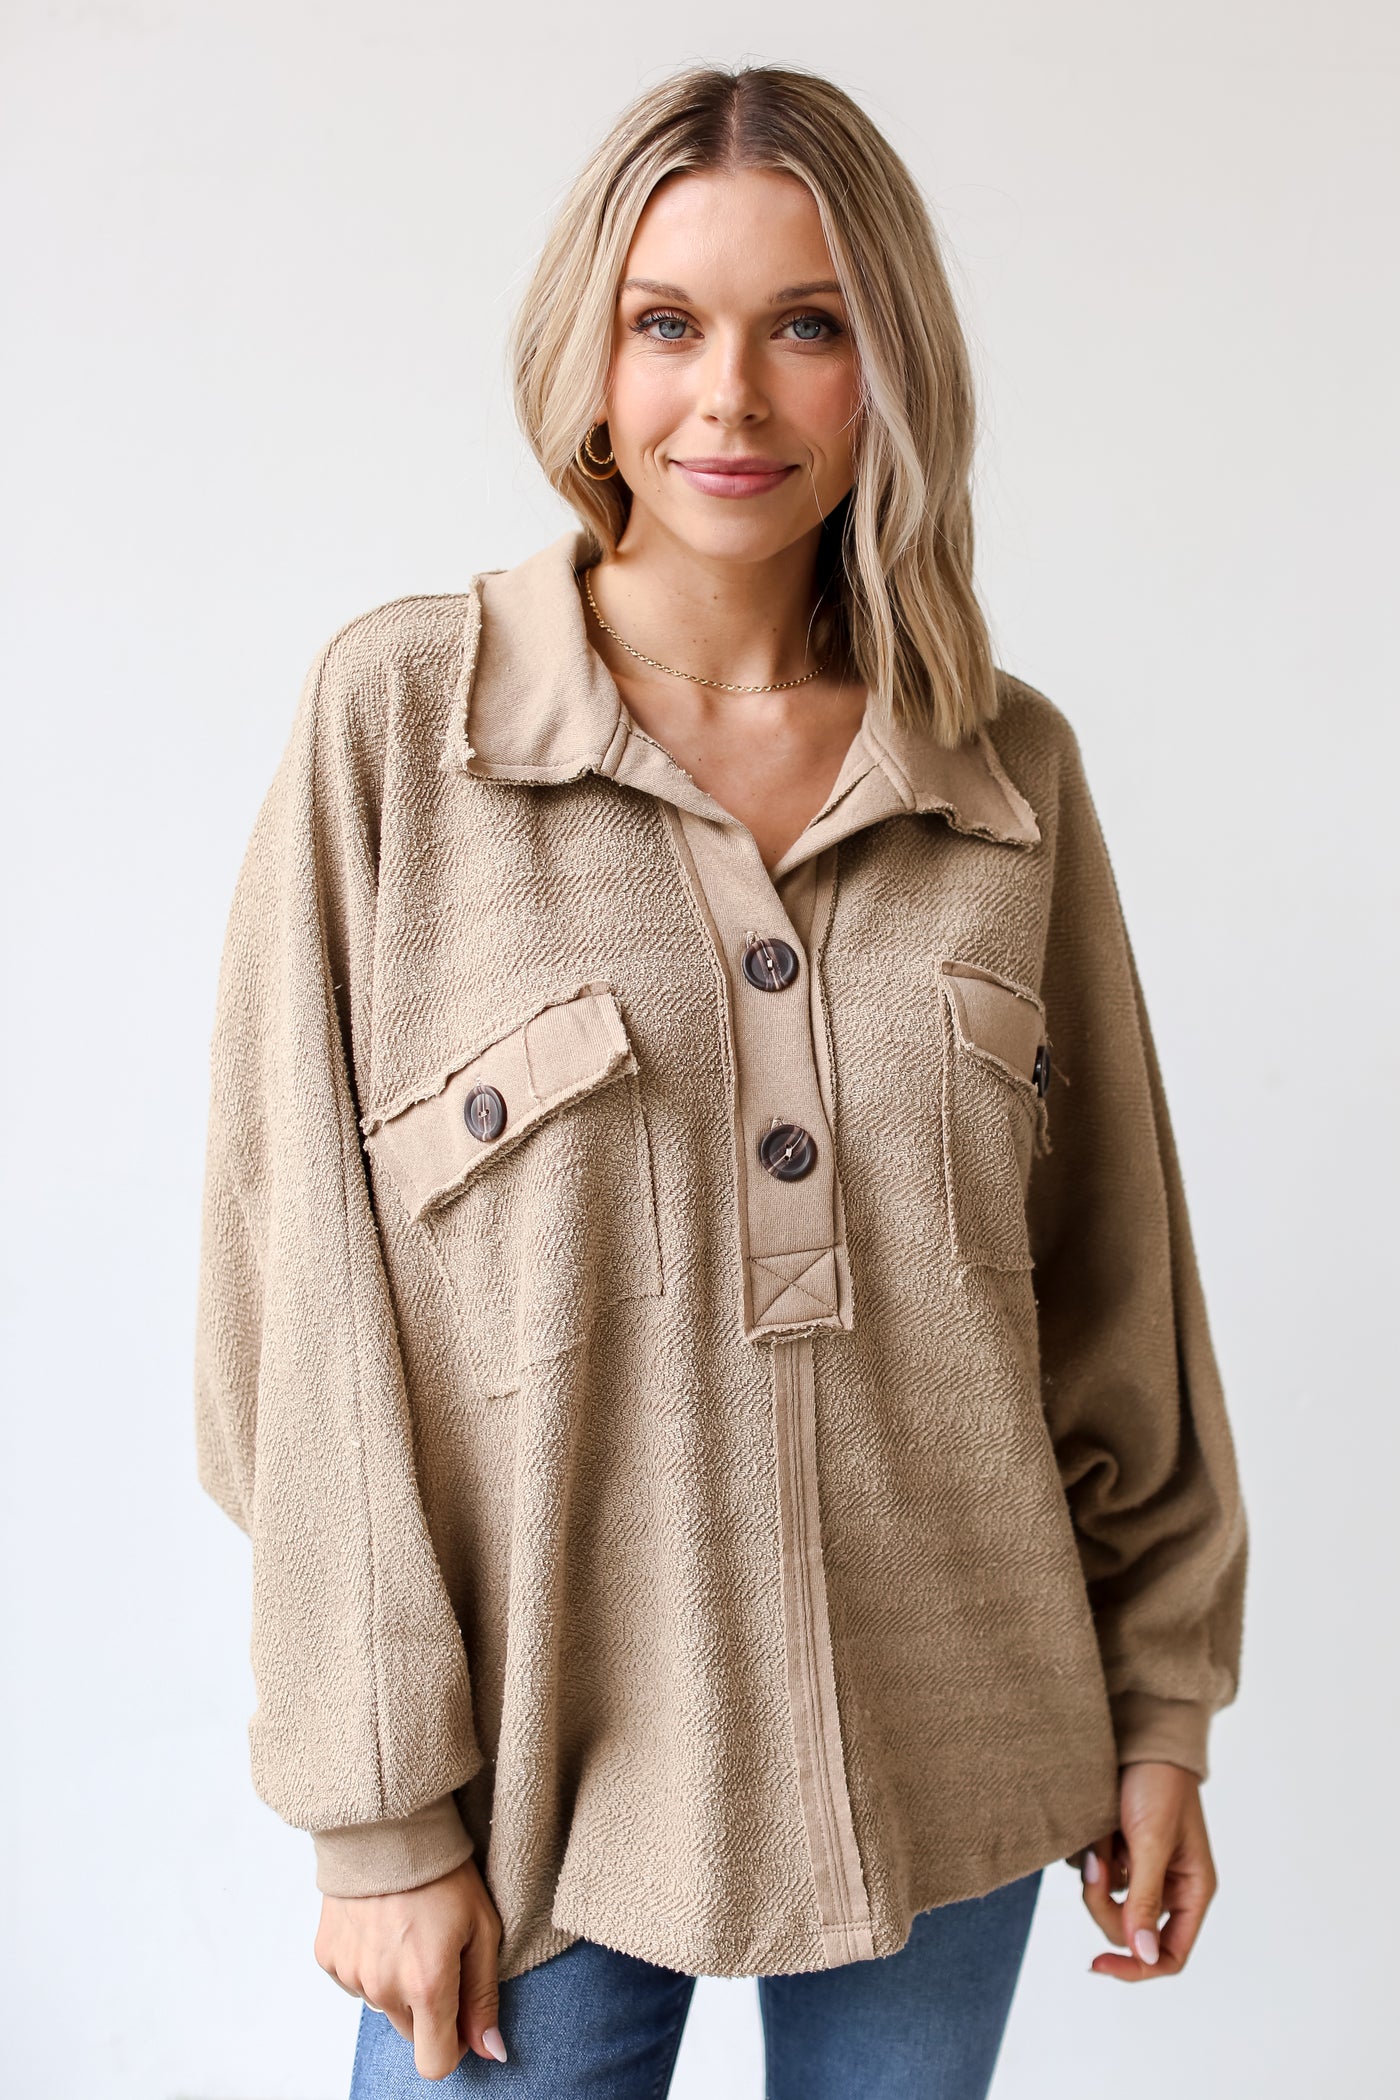 taupe Oversized Collared Top front view